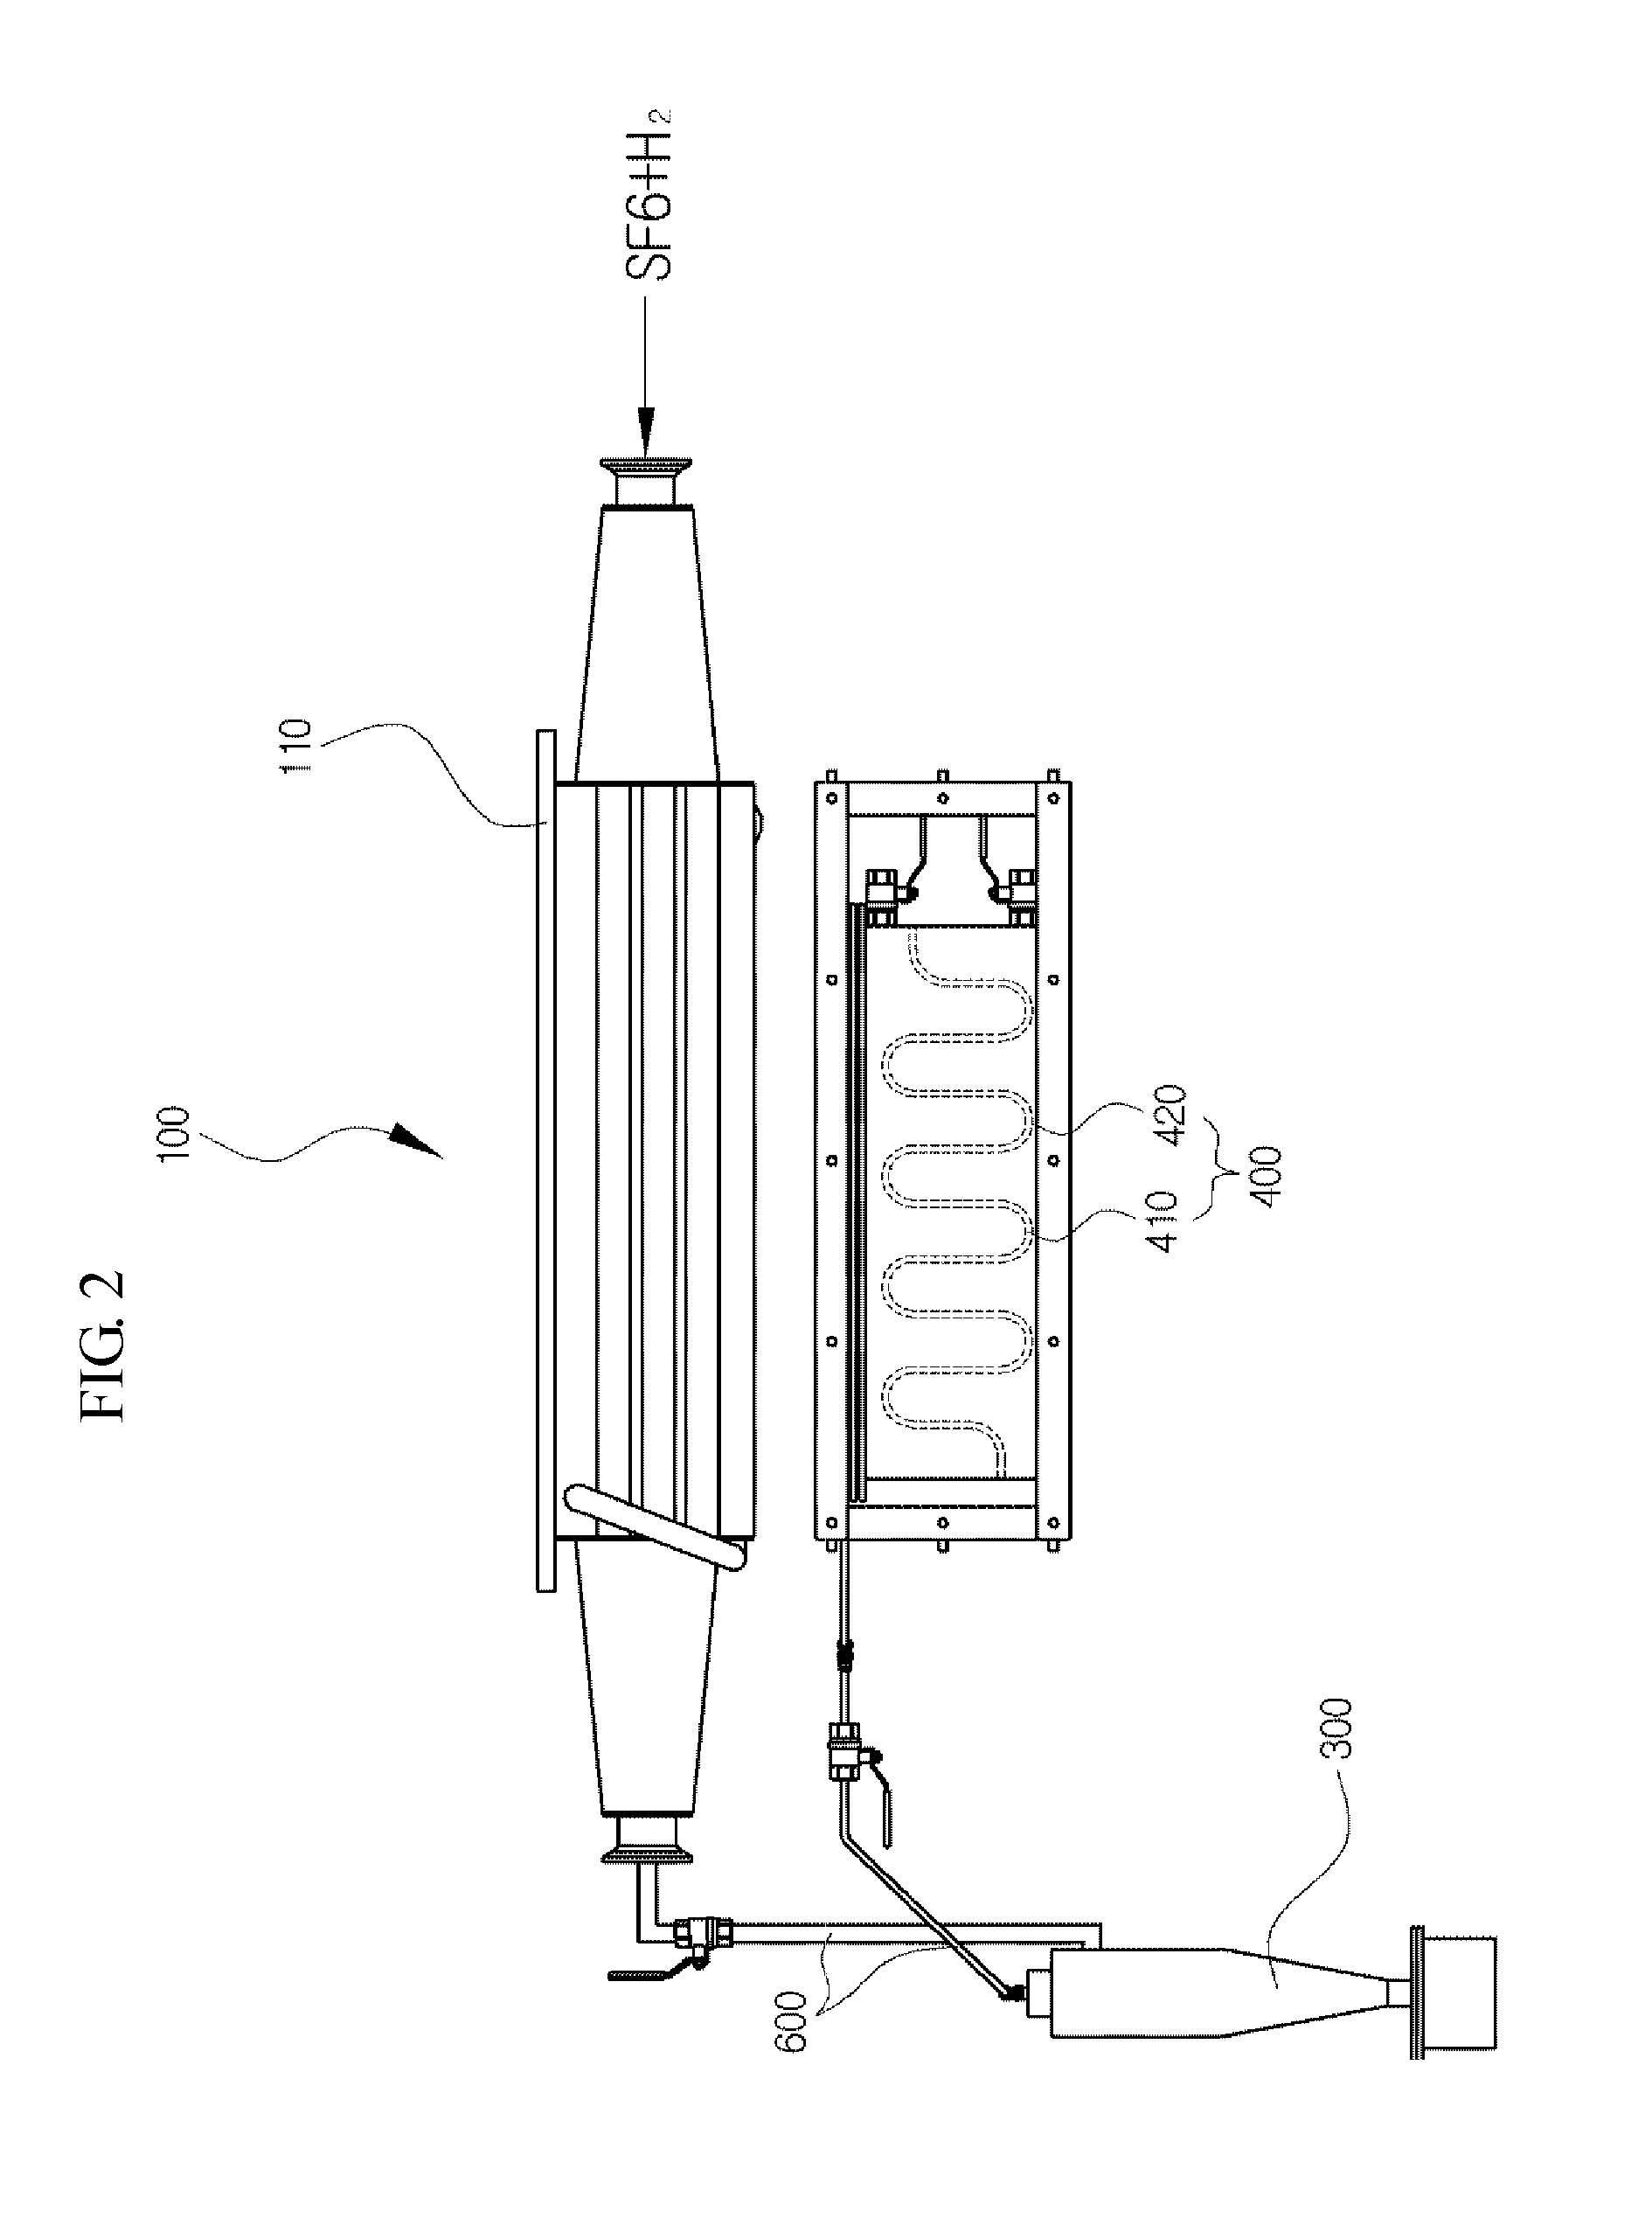 Method for treating sulfur hexafluoride using radiation and apparatus for collecting and treating by-products